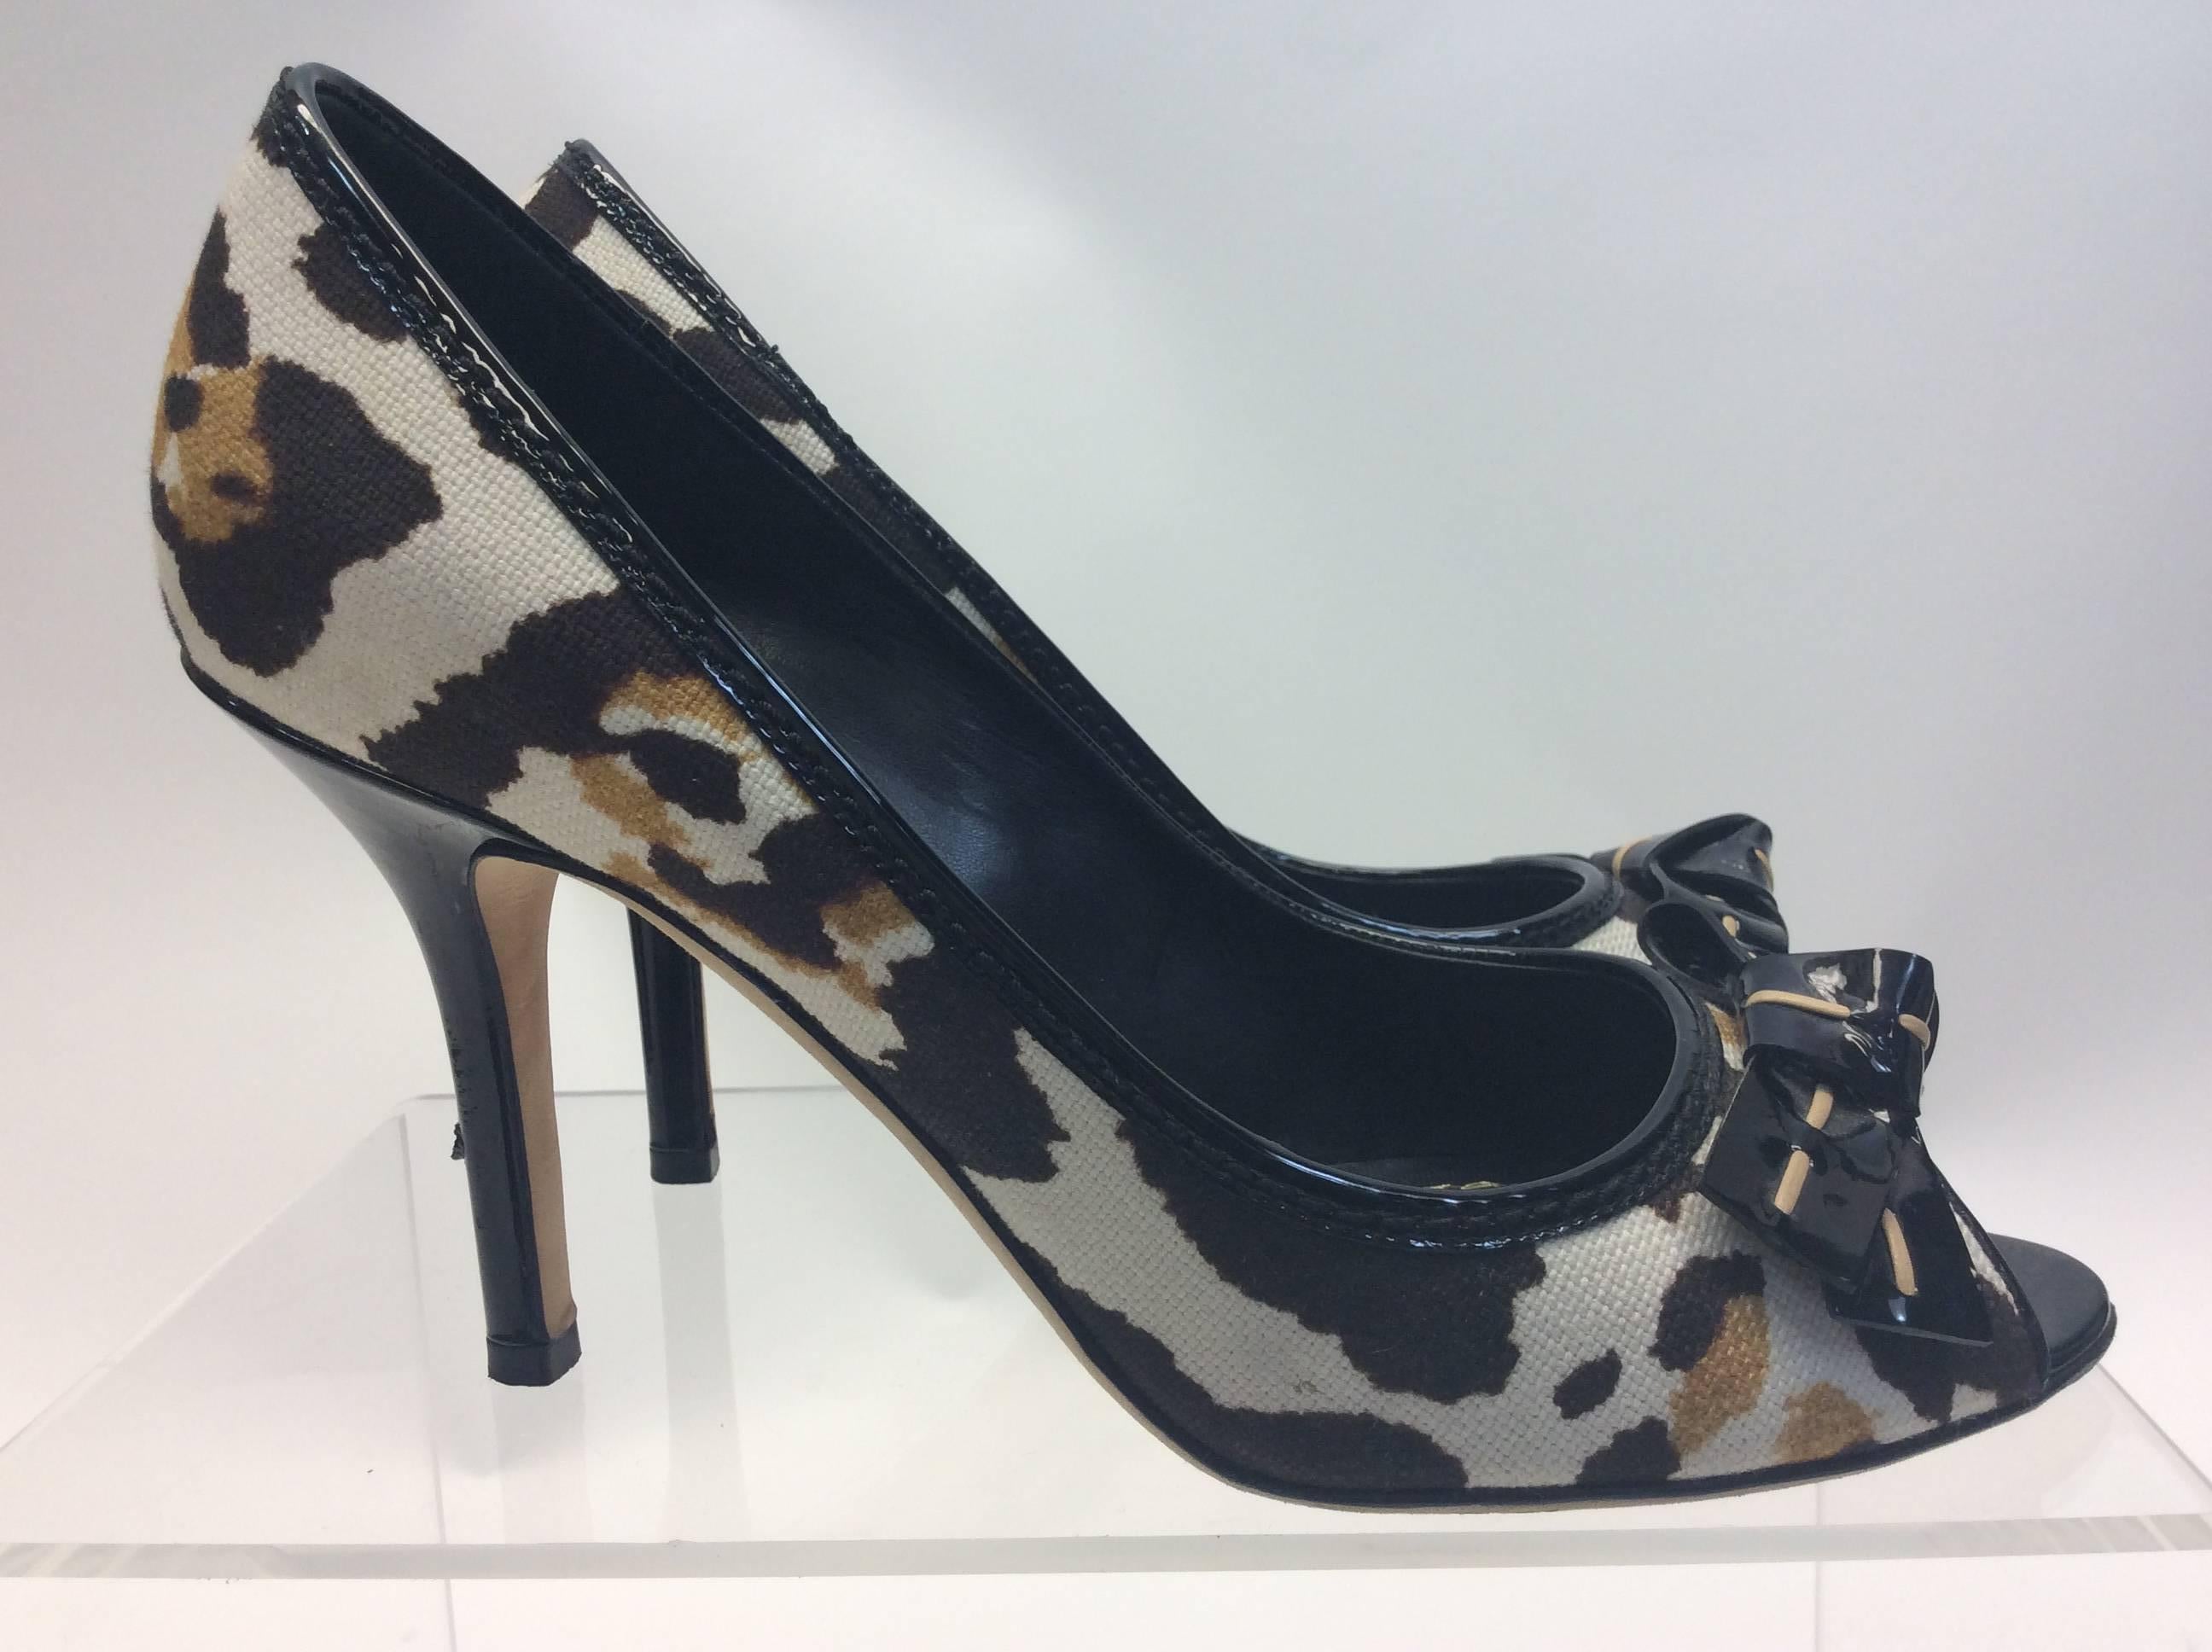 Christian Dior Animal Print Peep Toe Pump with Bow In Excellent Condition For Sale In Narberth, PA